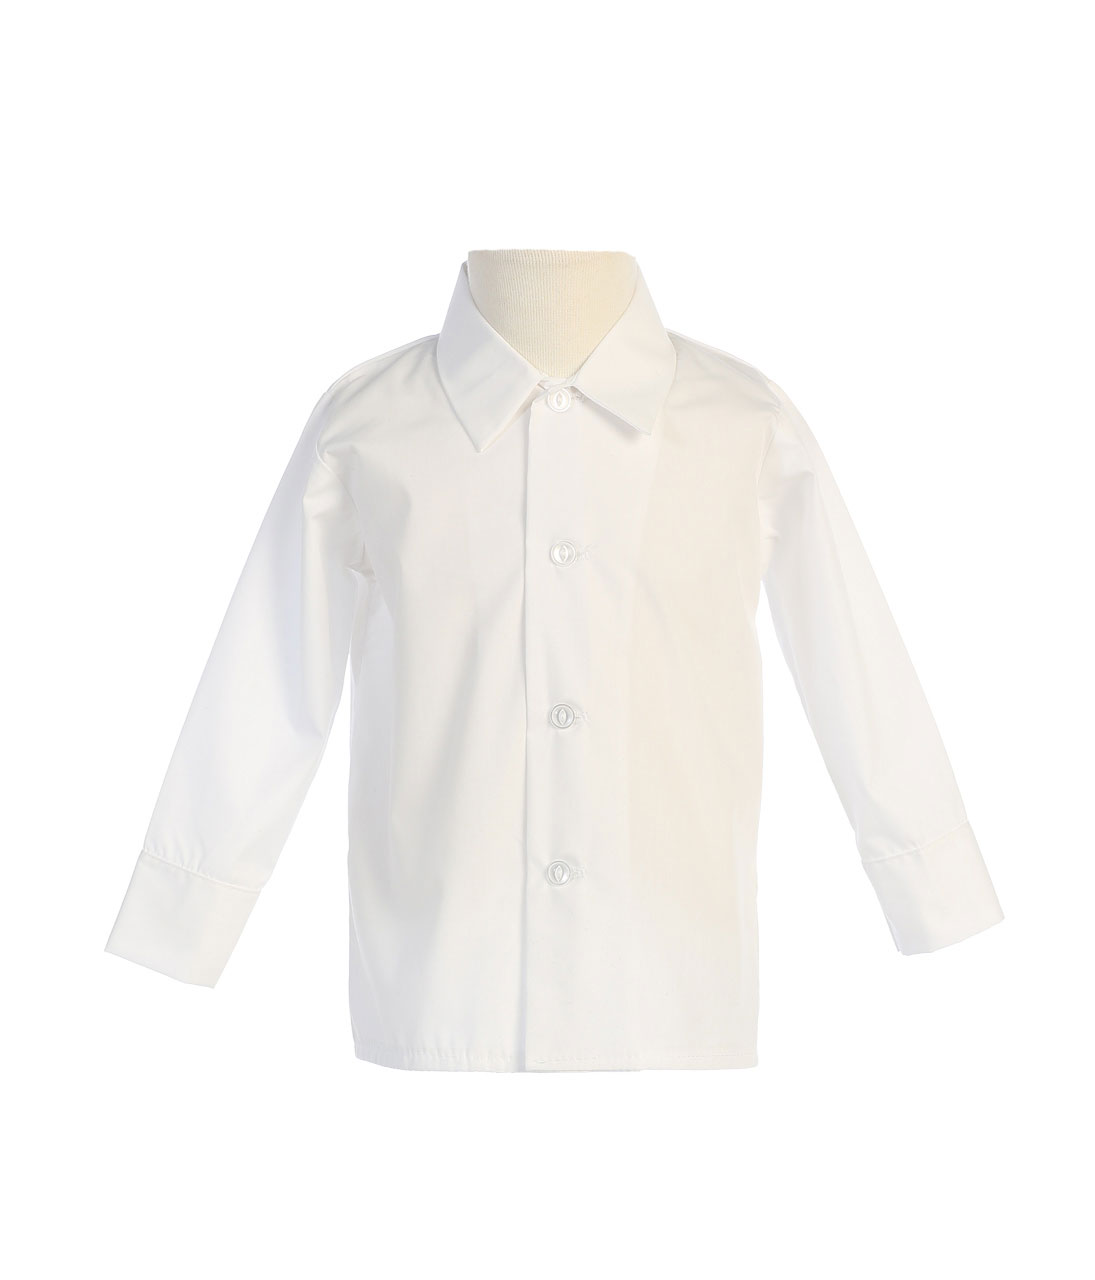 Boys Long Sleeved Simple Dress Shirt - Available in White 7